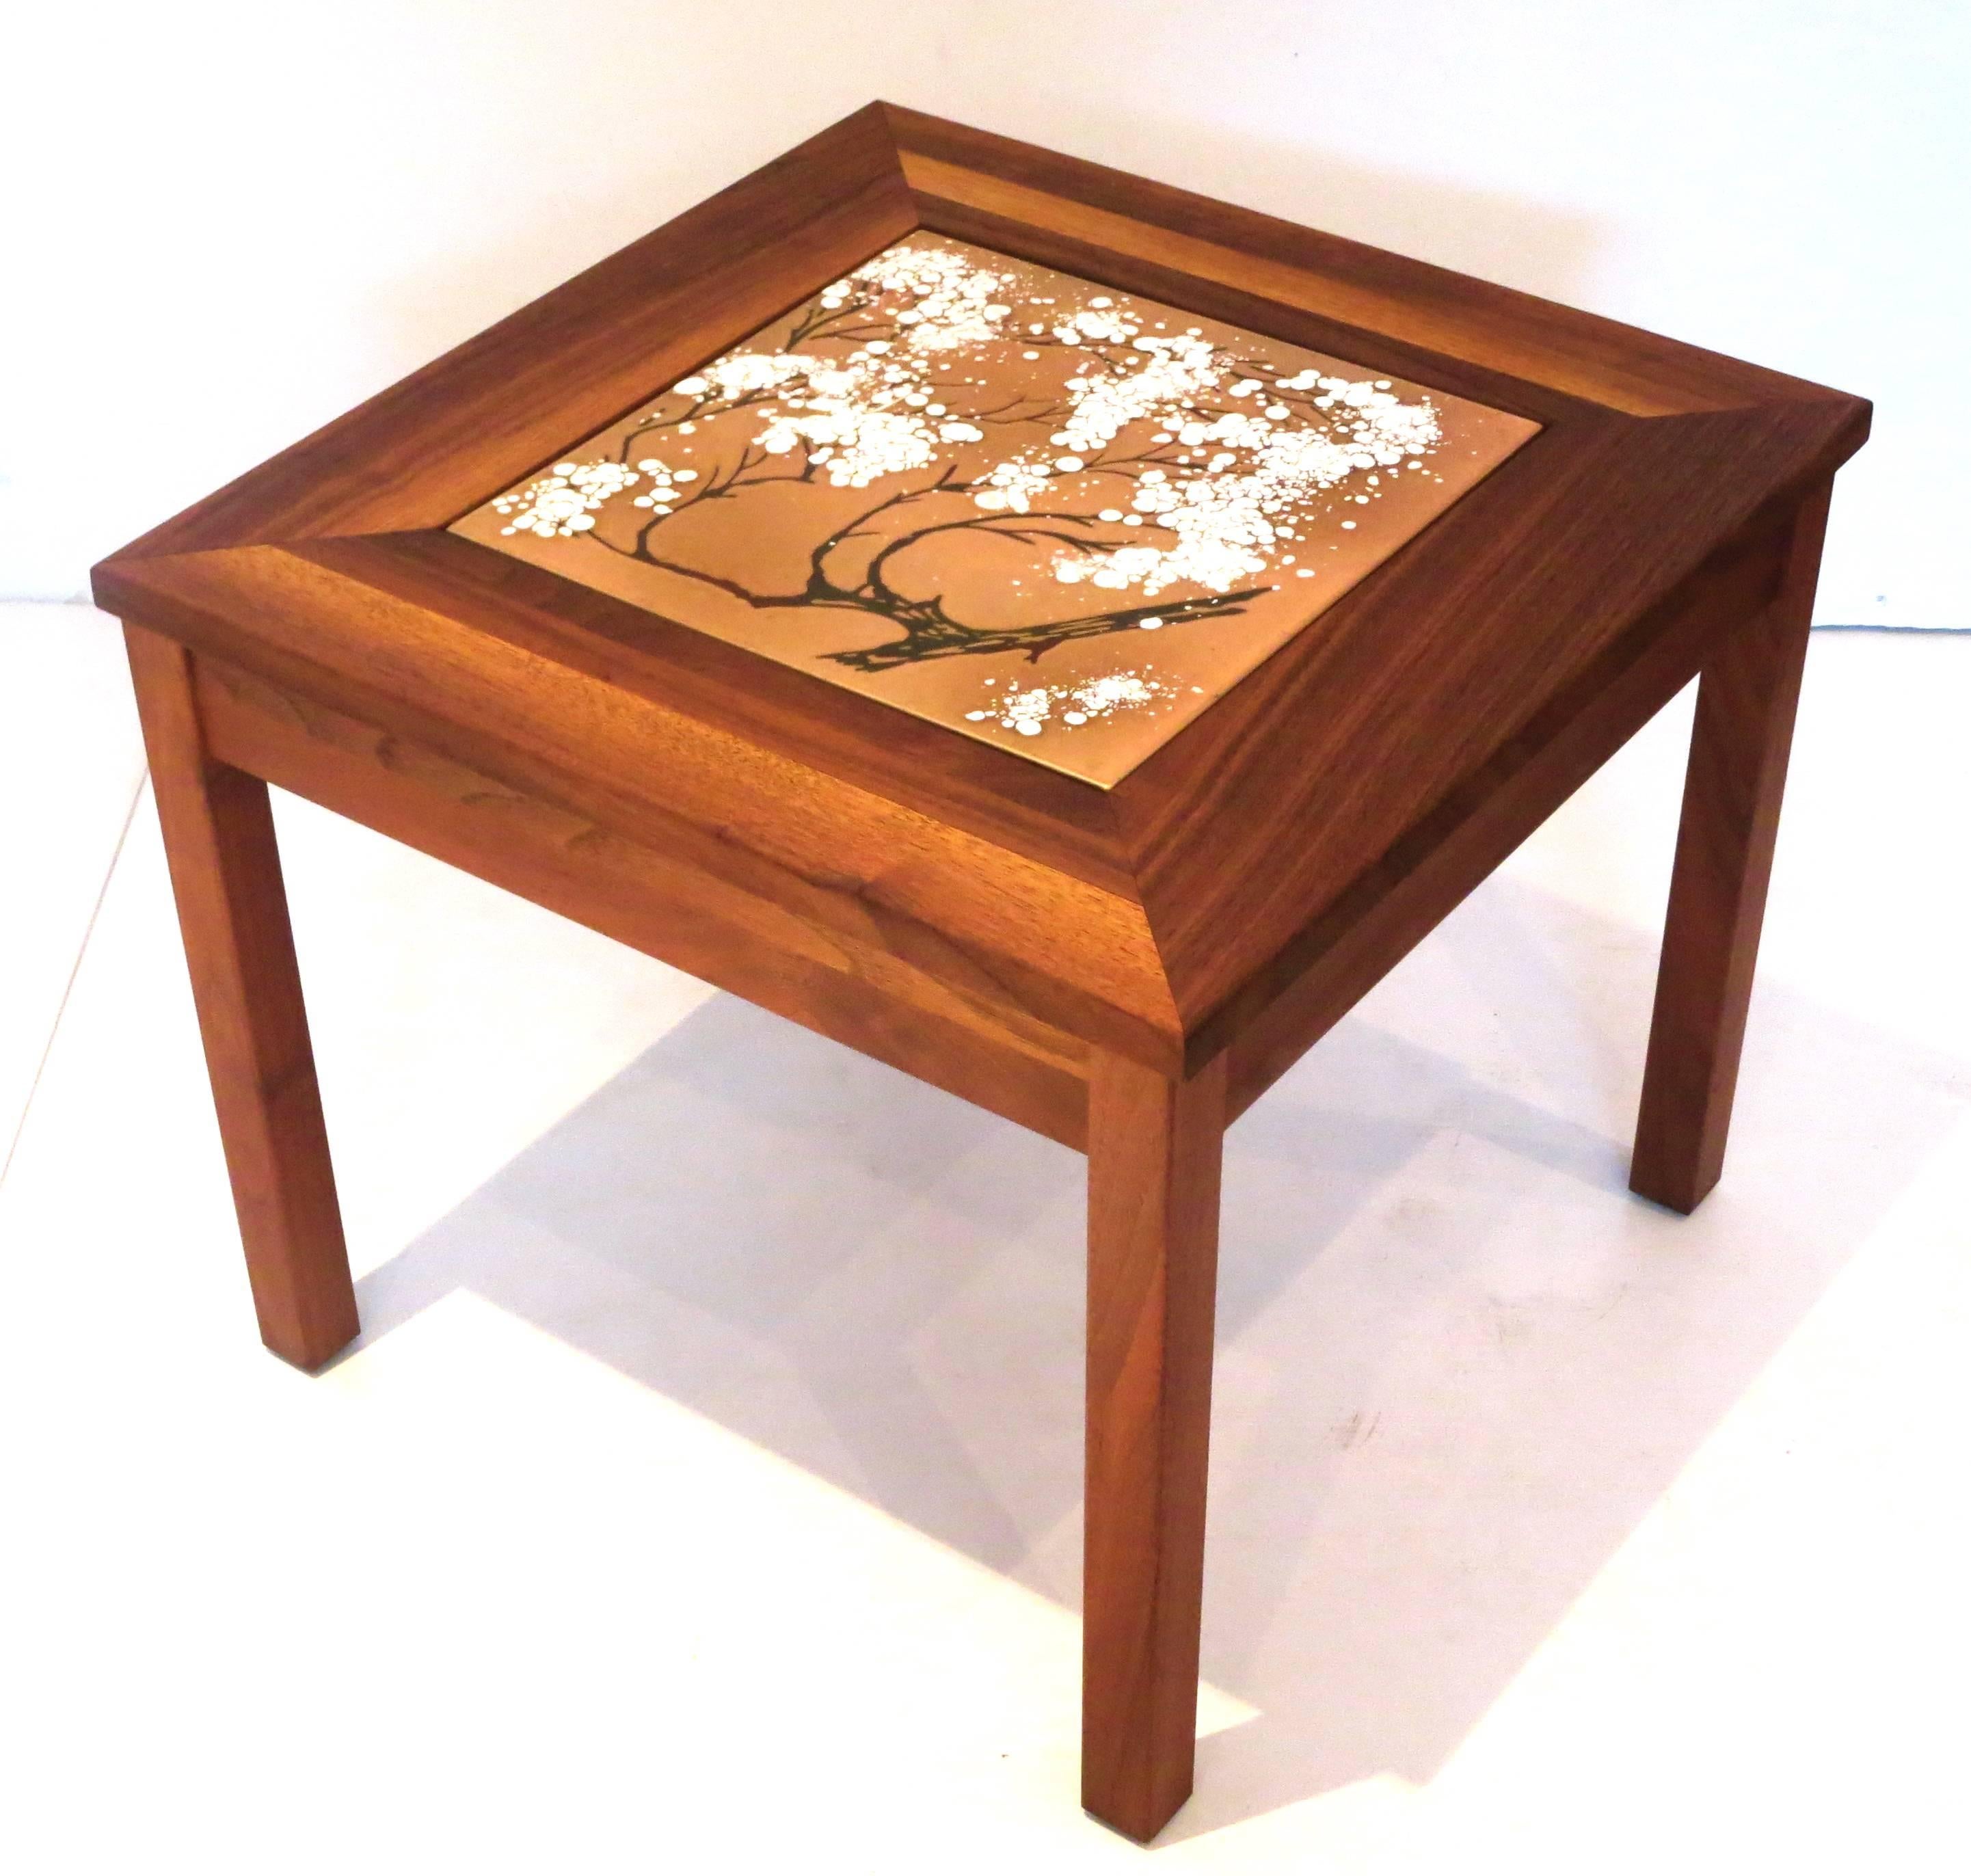 American Pair of Solid Walnut Enameled End Tables Designed by Jhon Keal for Brown Saltman